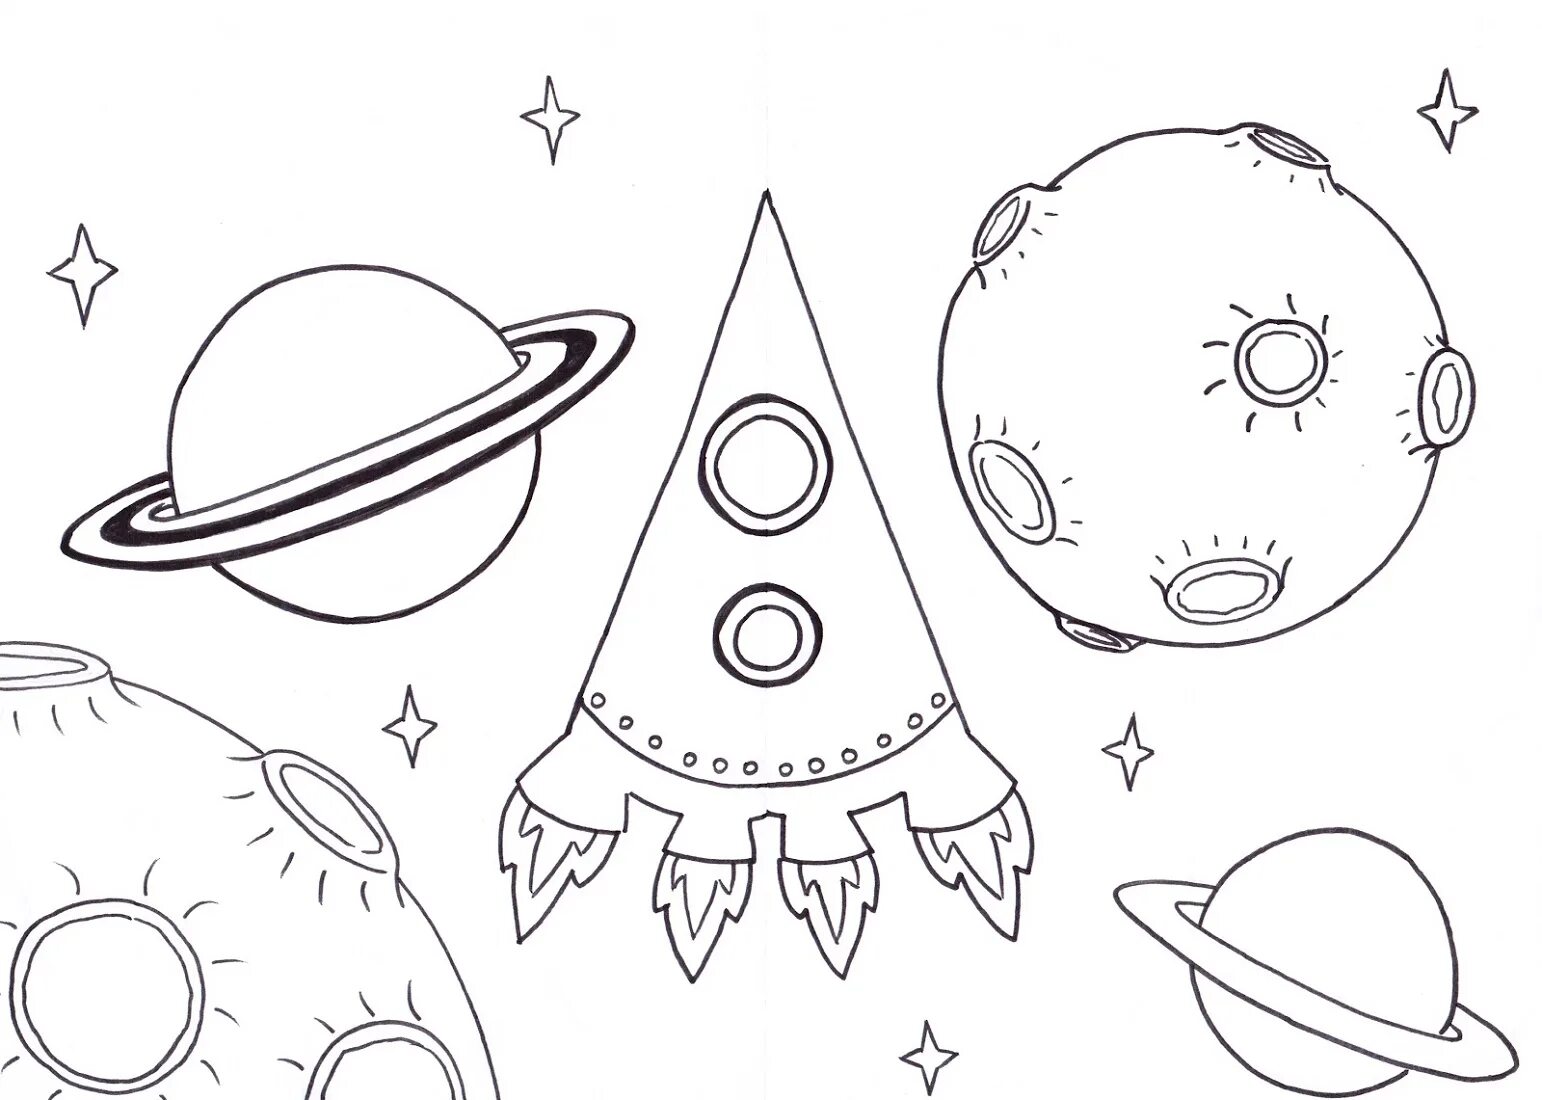 Glorious space 1st grade coloring page